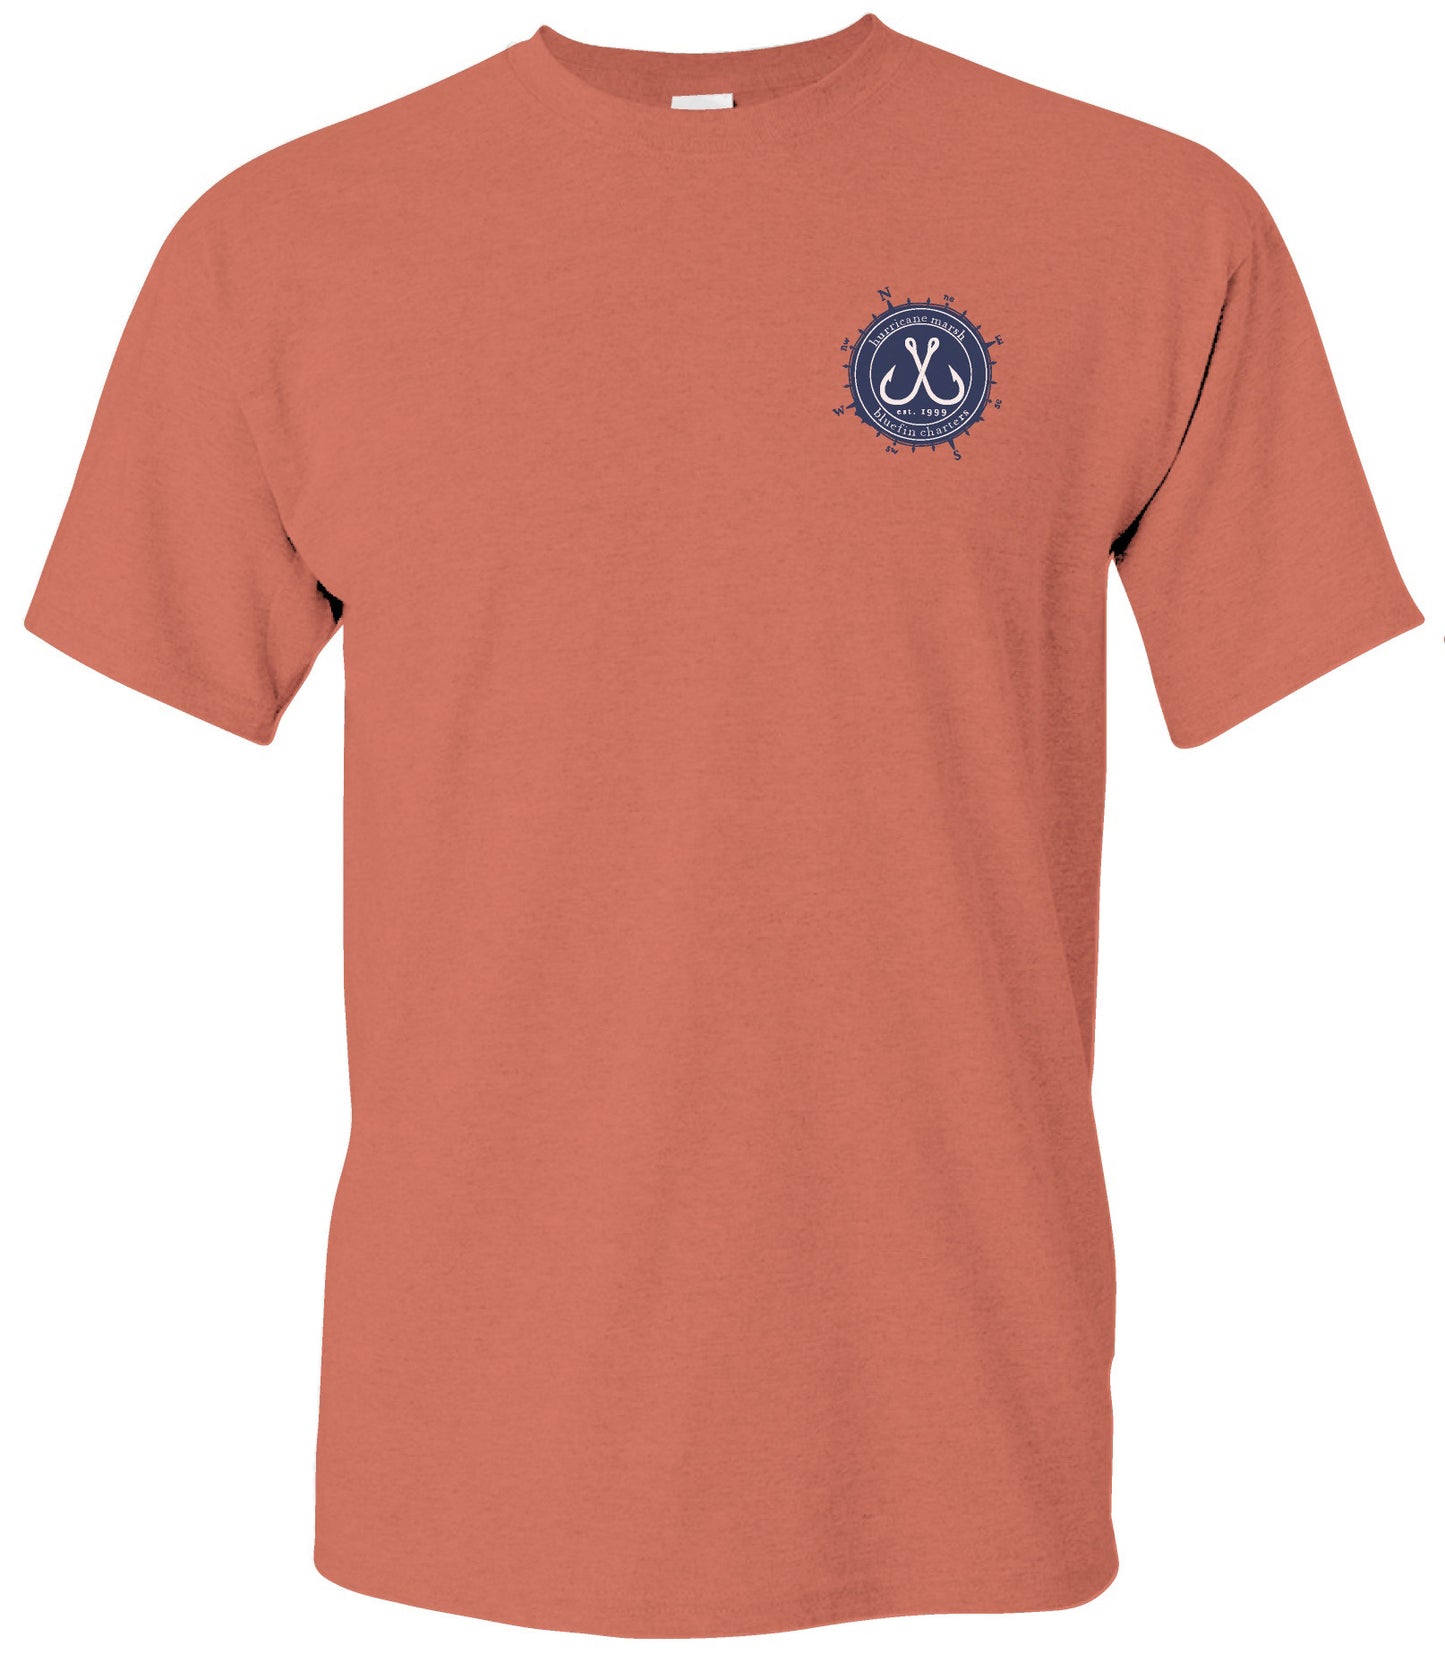 
                  
                    Bluefin Charters Coral T-Shirt
                  
                